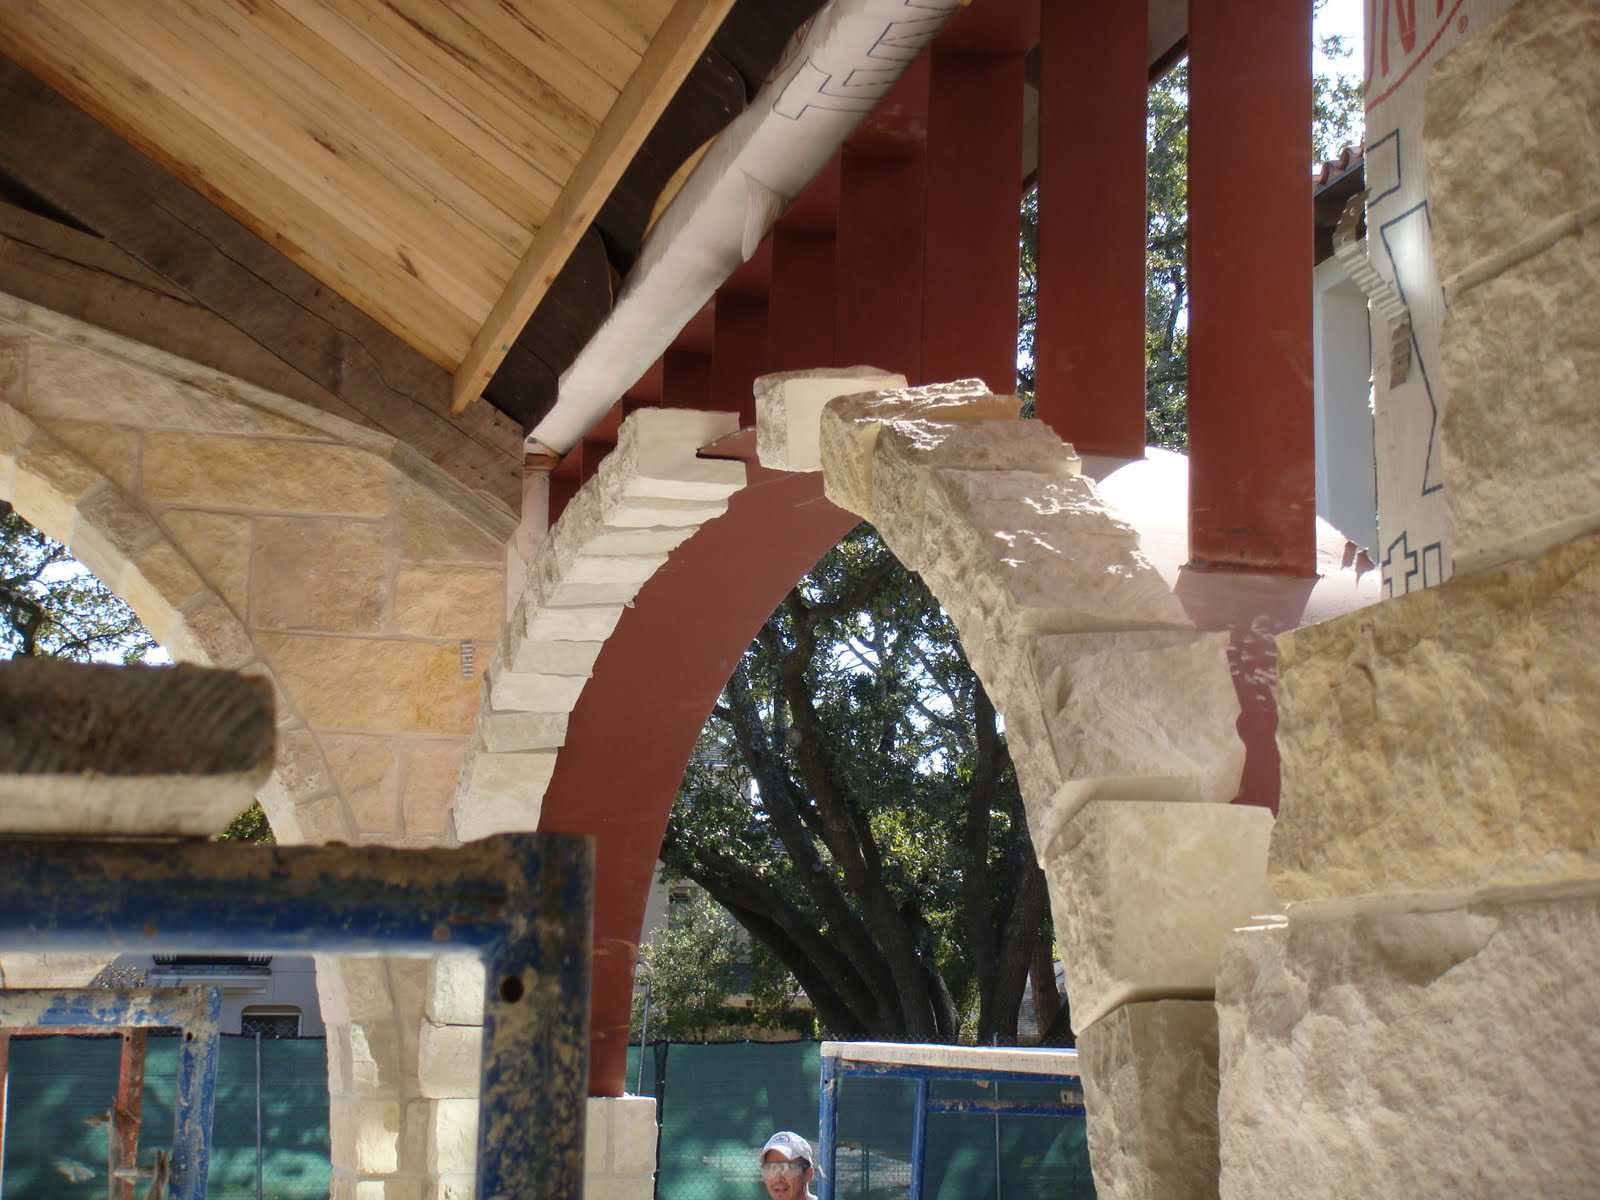 Notice slot in stone to fit stone lintel.